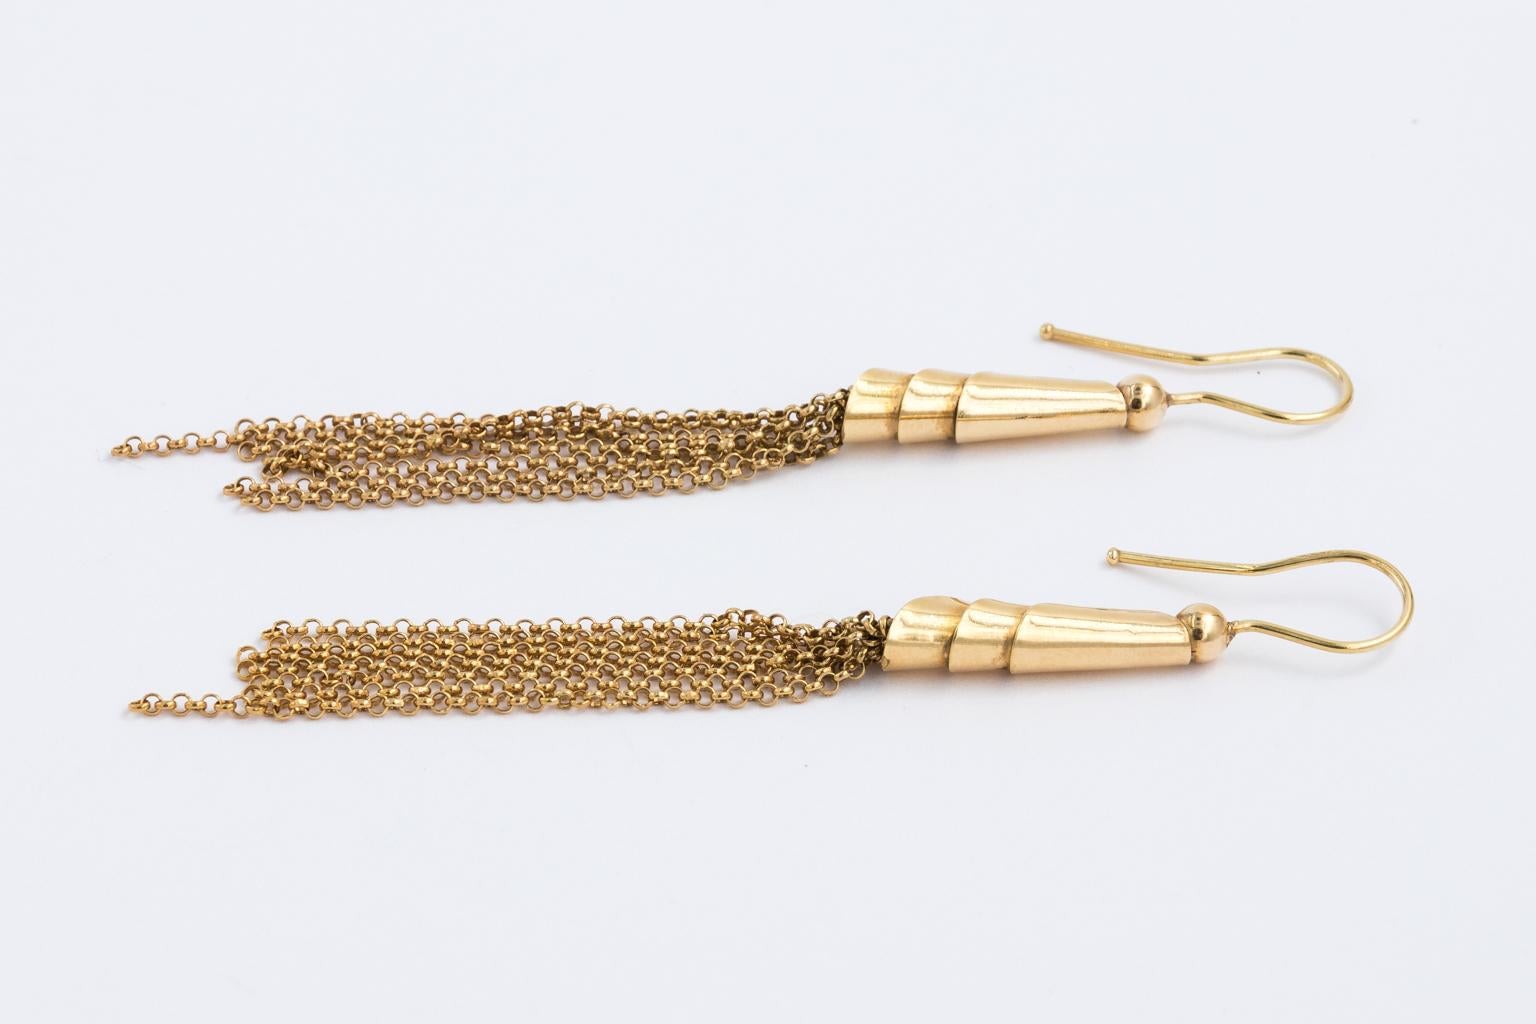 Circa 1980s 18 Karat Gold tassel earrings from Italy. The earrings are pierced with a French wire technique and hang 3.00 Inches long with one tassel slightly longer for added style. Holding the tassels are hollow barrel shapes with three layers.
